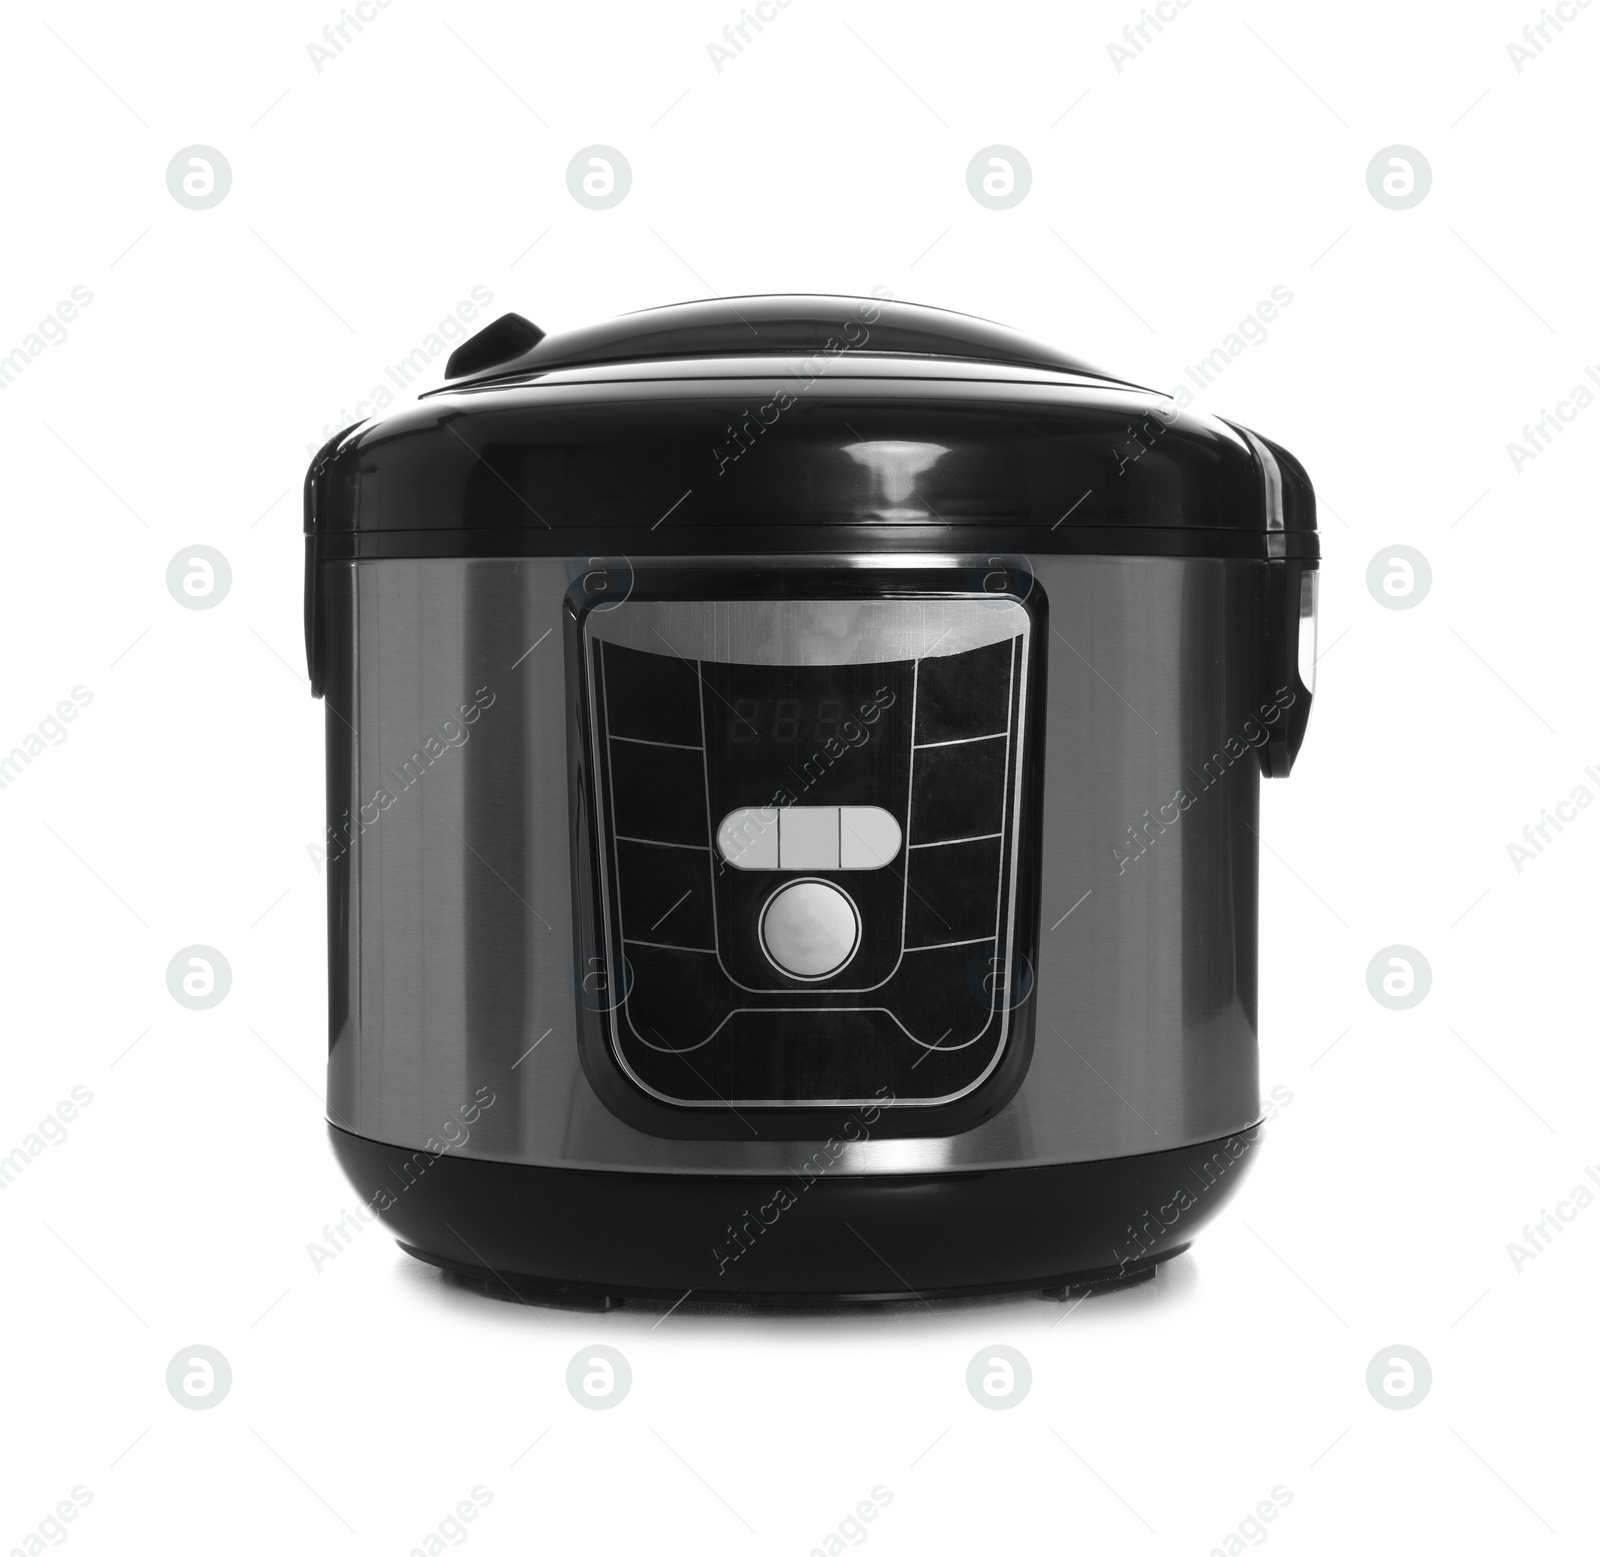 Photo of Modern electric multi cooker on white background